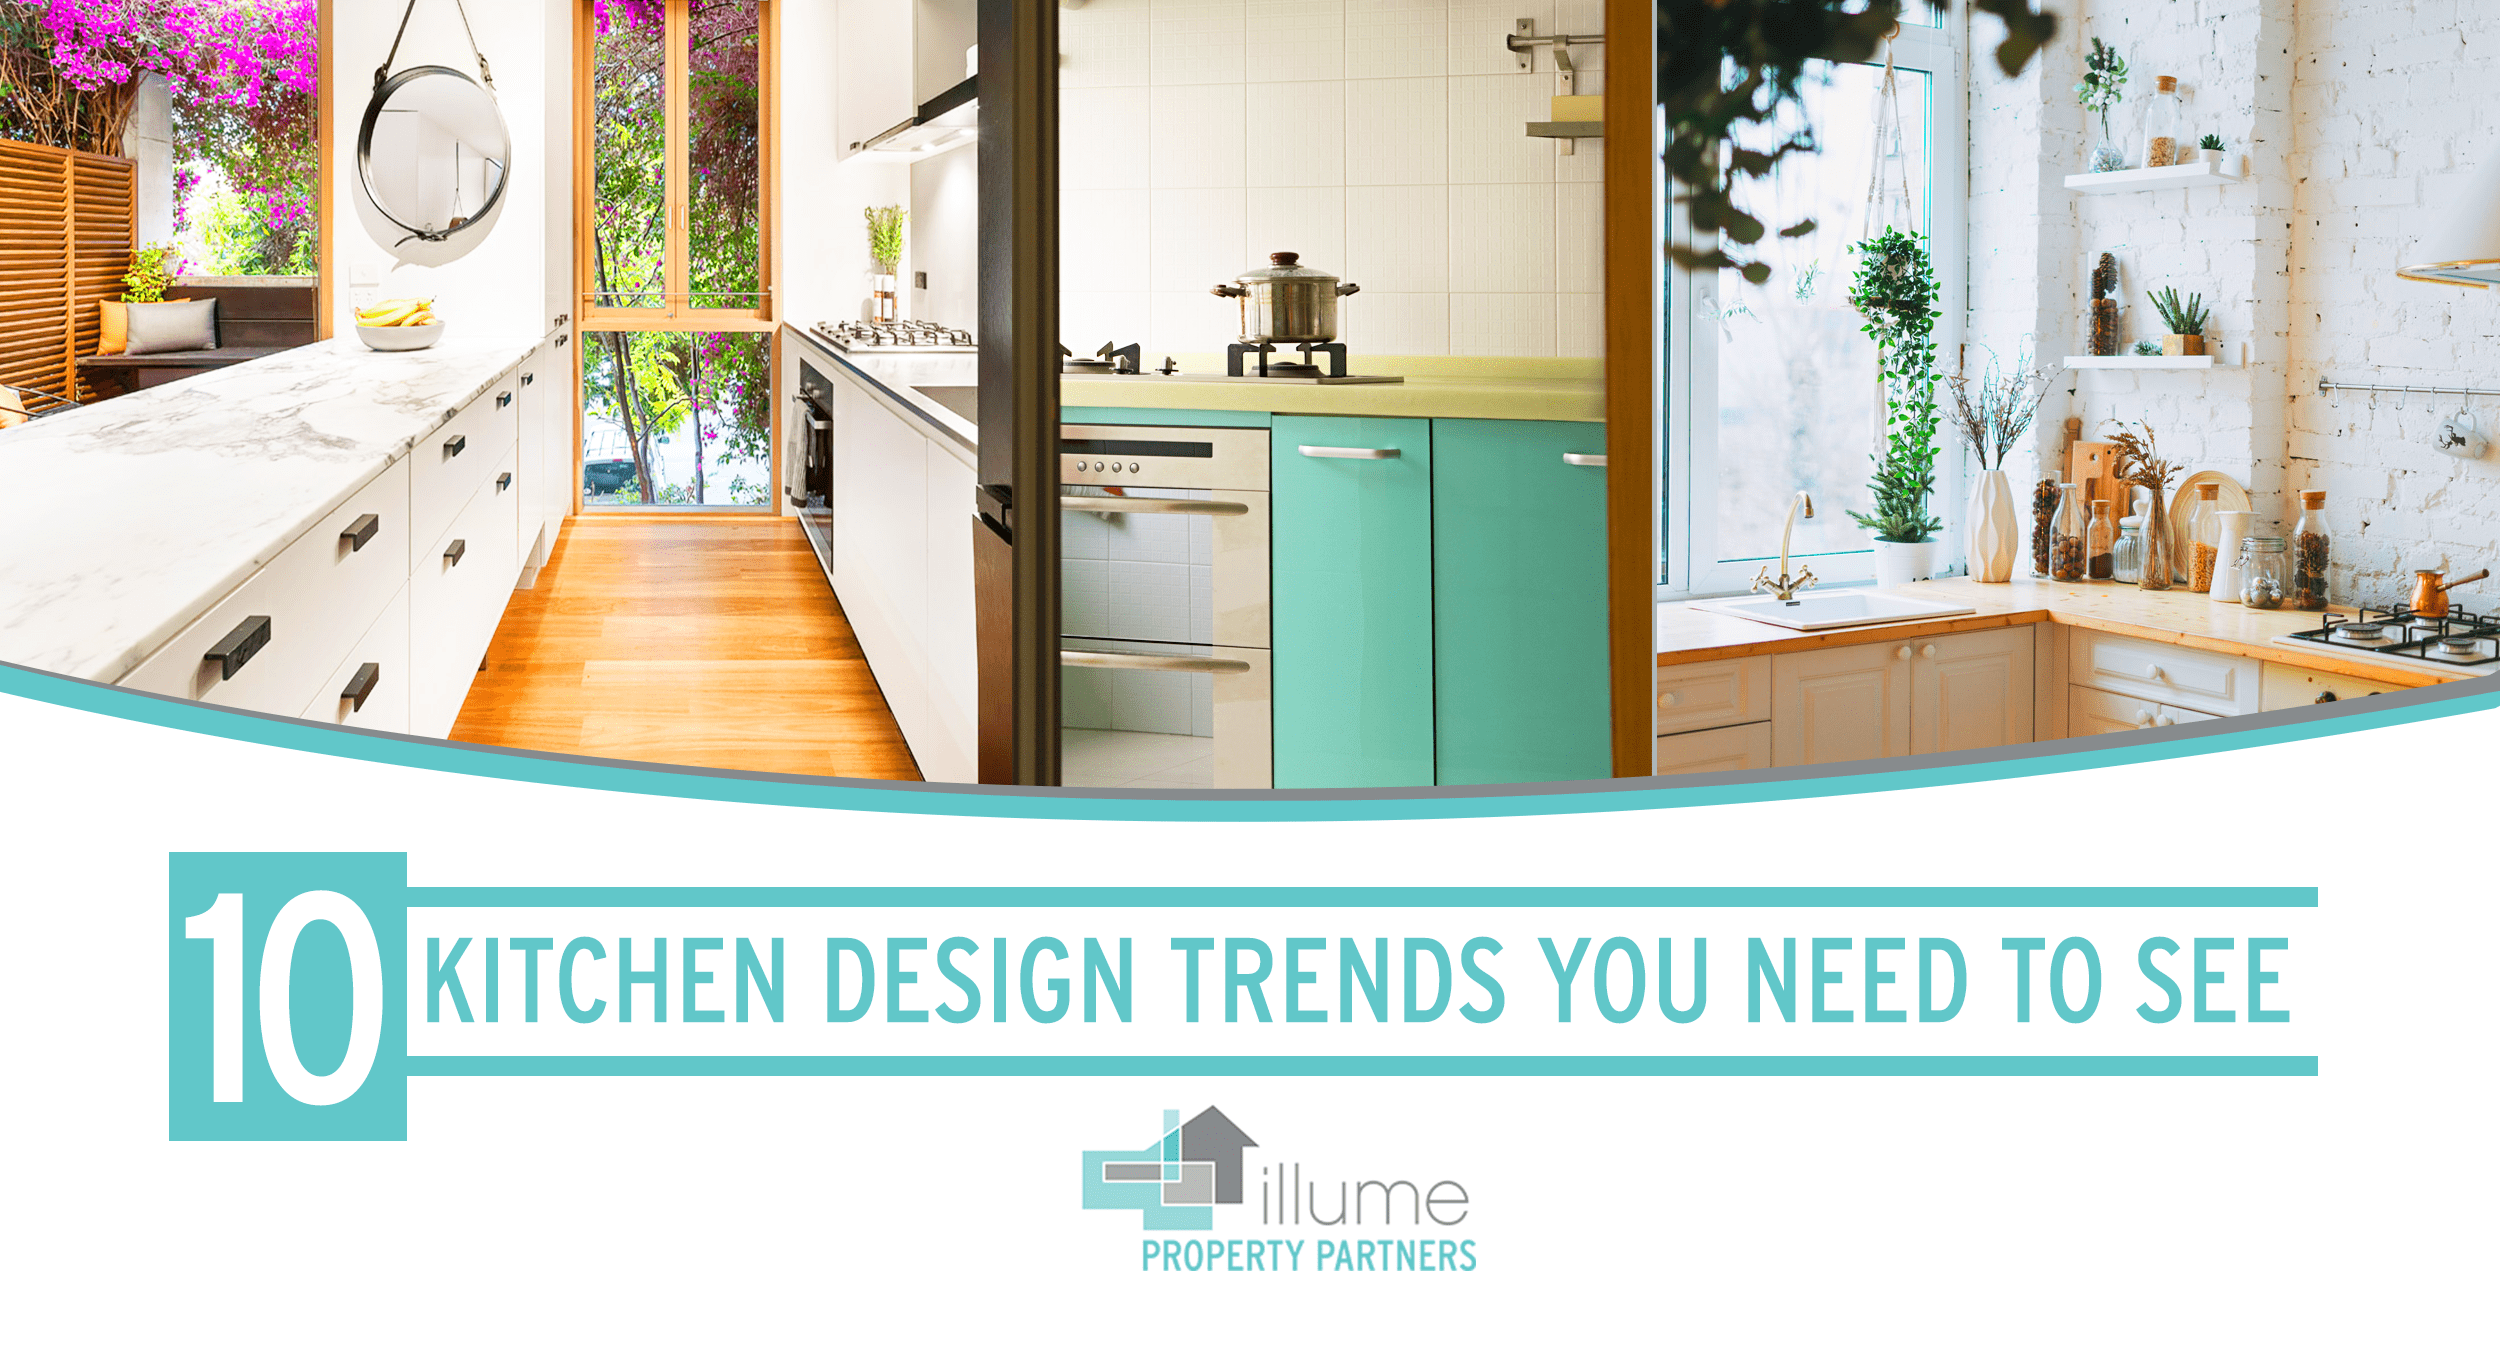 10 Kitchen Design Trends You Need to See